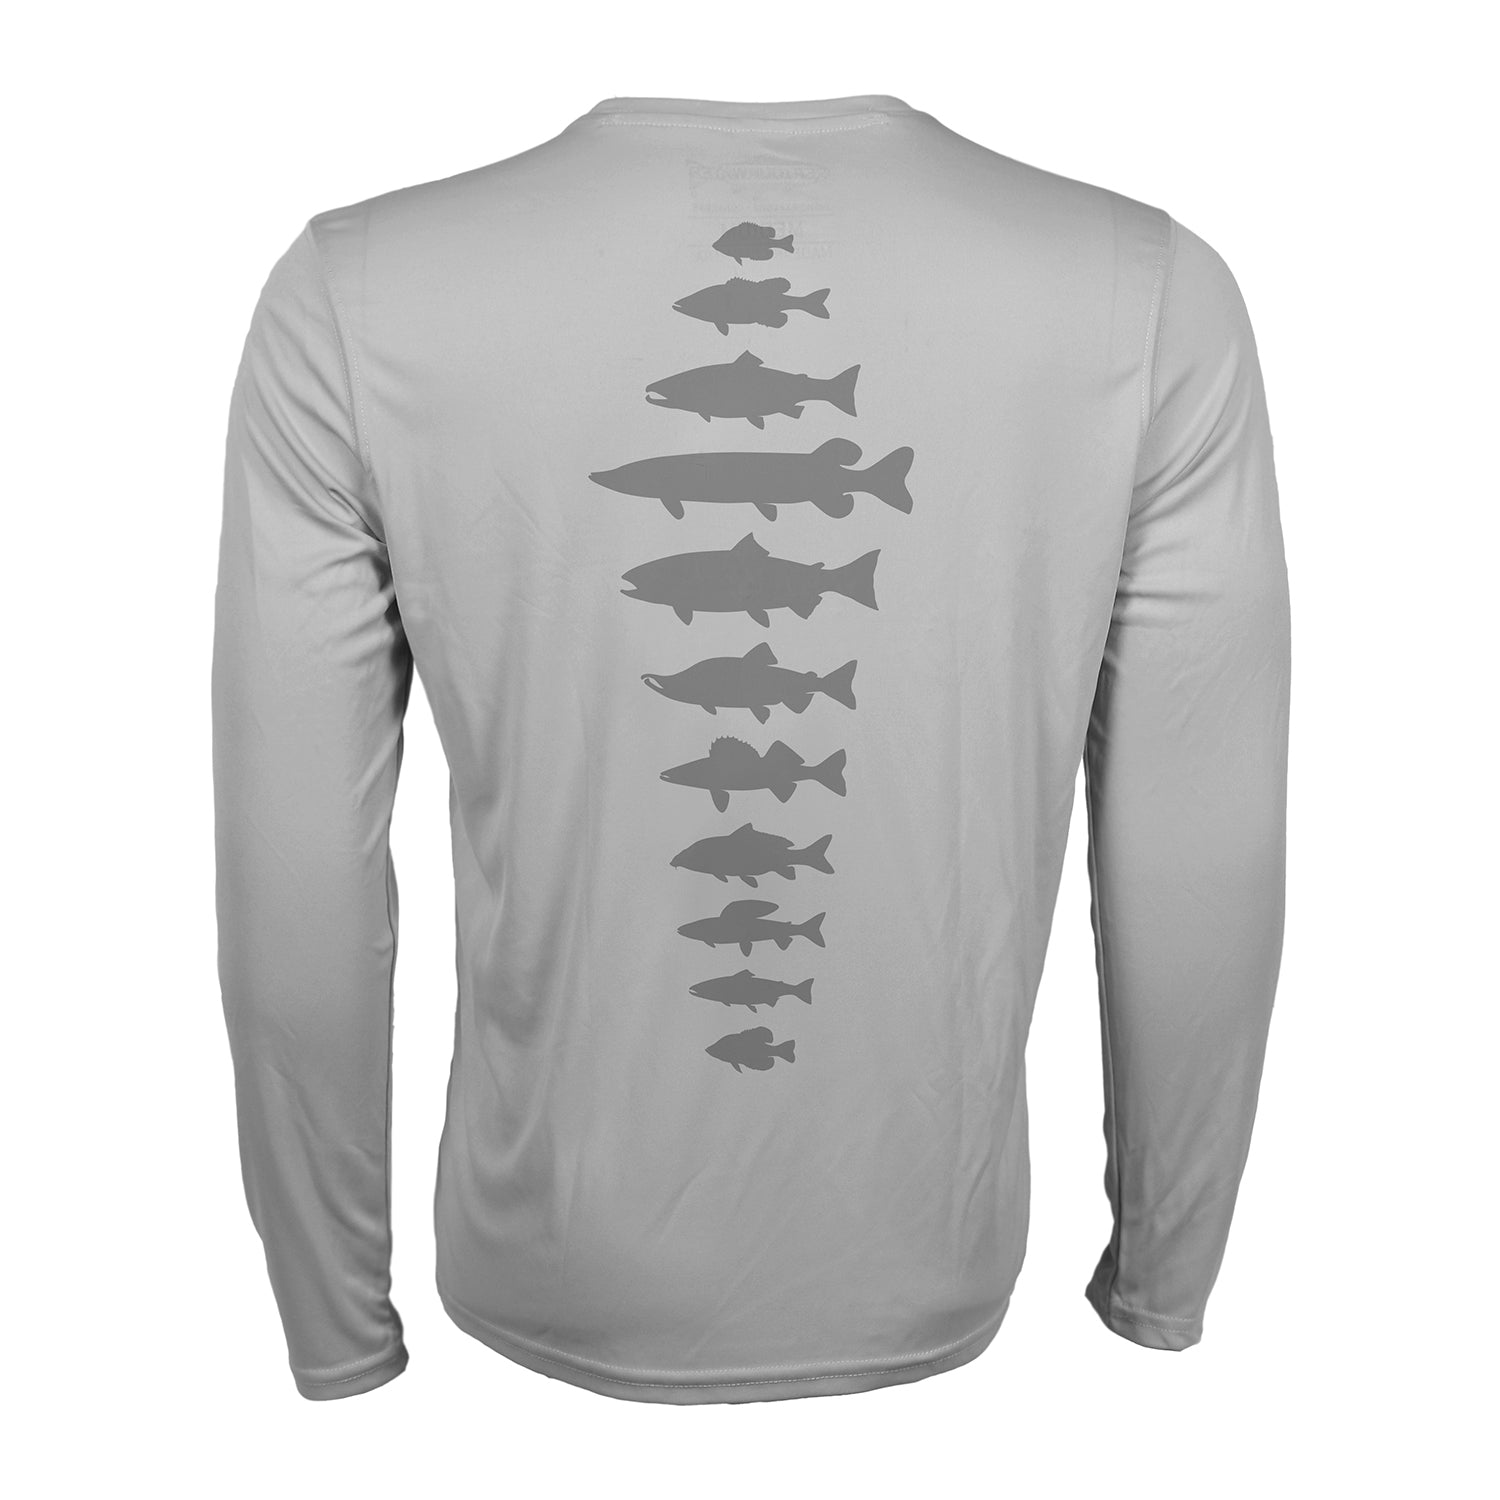 backside of gray sun shirt that has freshwater fish species going down the spine in gray